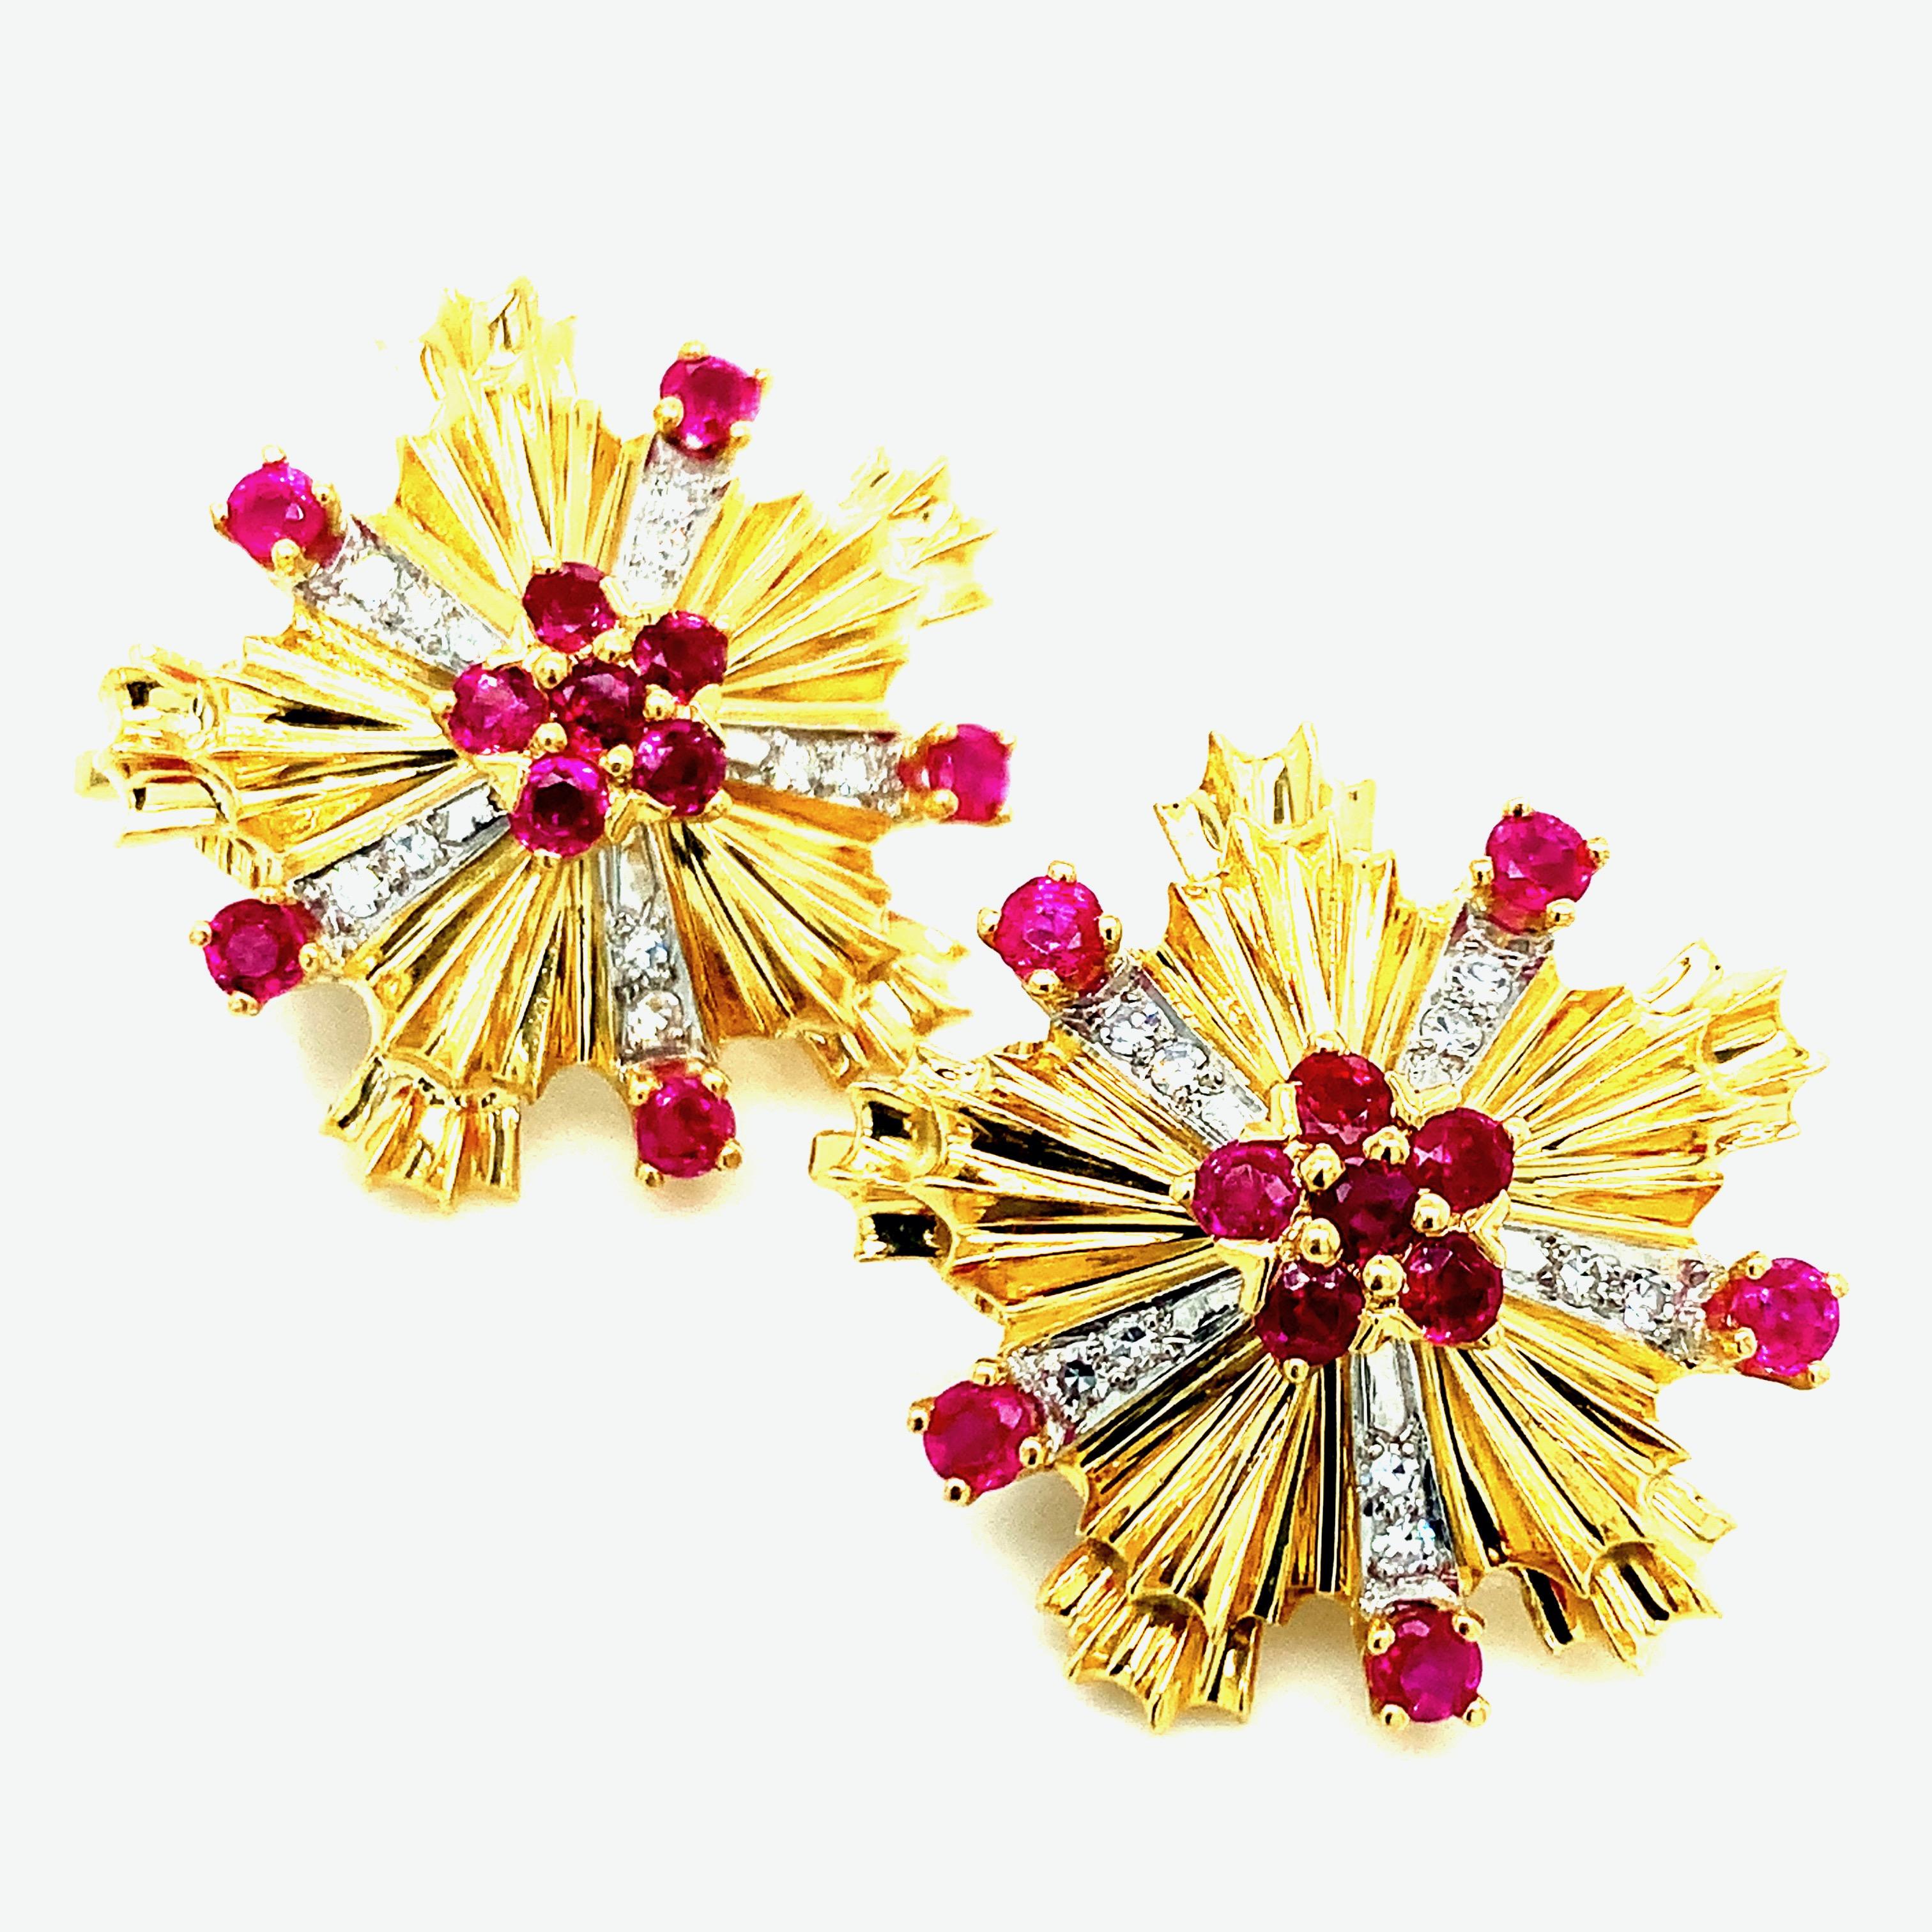 Signed Tiffany & Co., these ear clips are made out of 18 karat yellow gold with diamonds weighing approximately 0.40 carat and rubies weighing approximately 1.5 carat. Total weight: 17.3 grams. Width: 2.3 cm. 

Serial No. PA 2423905 